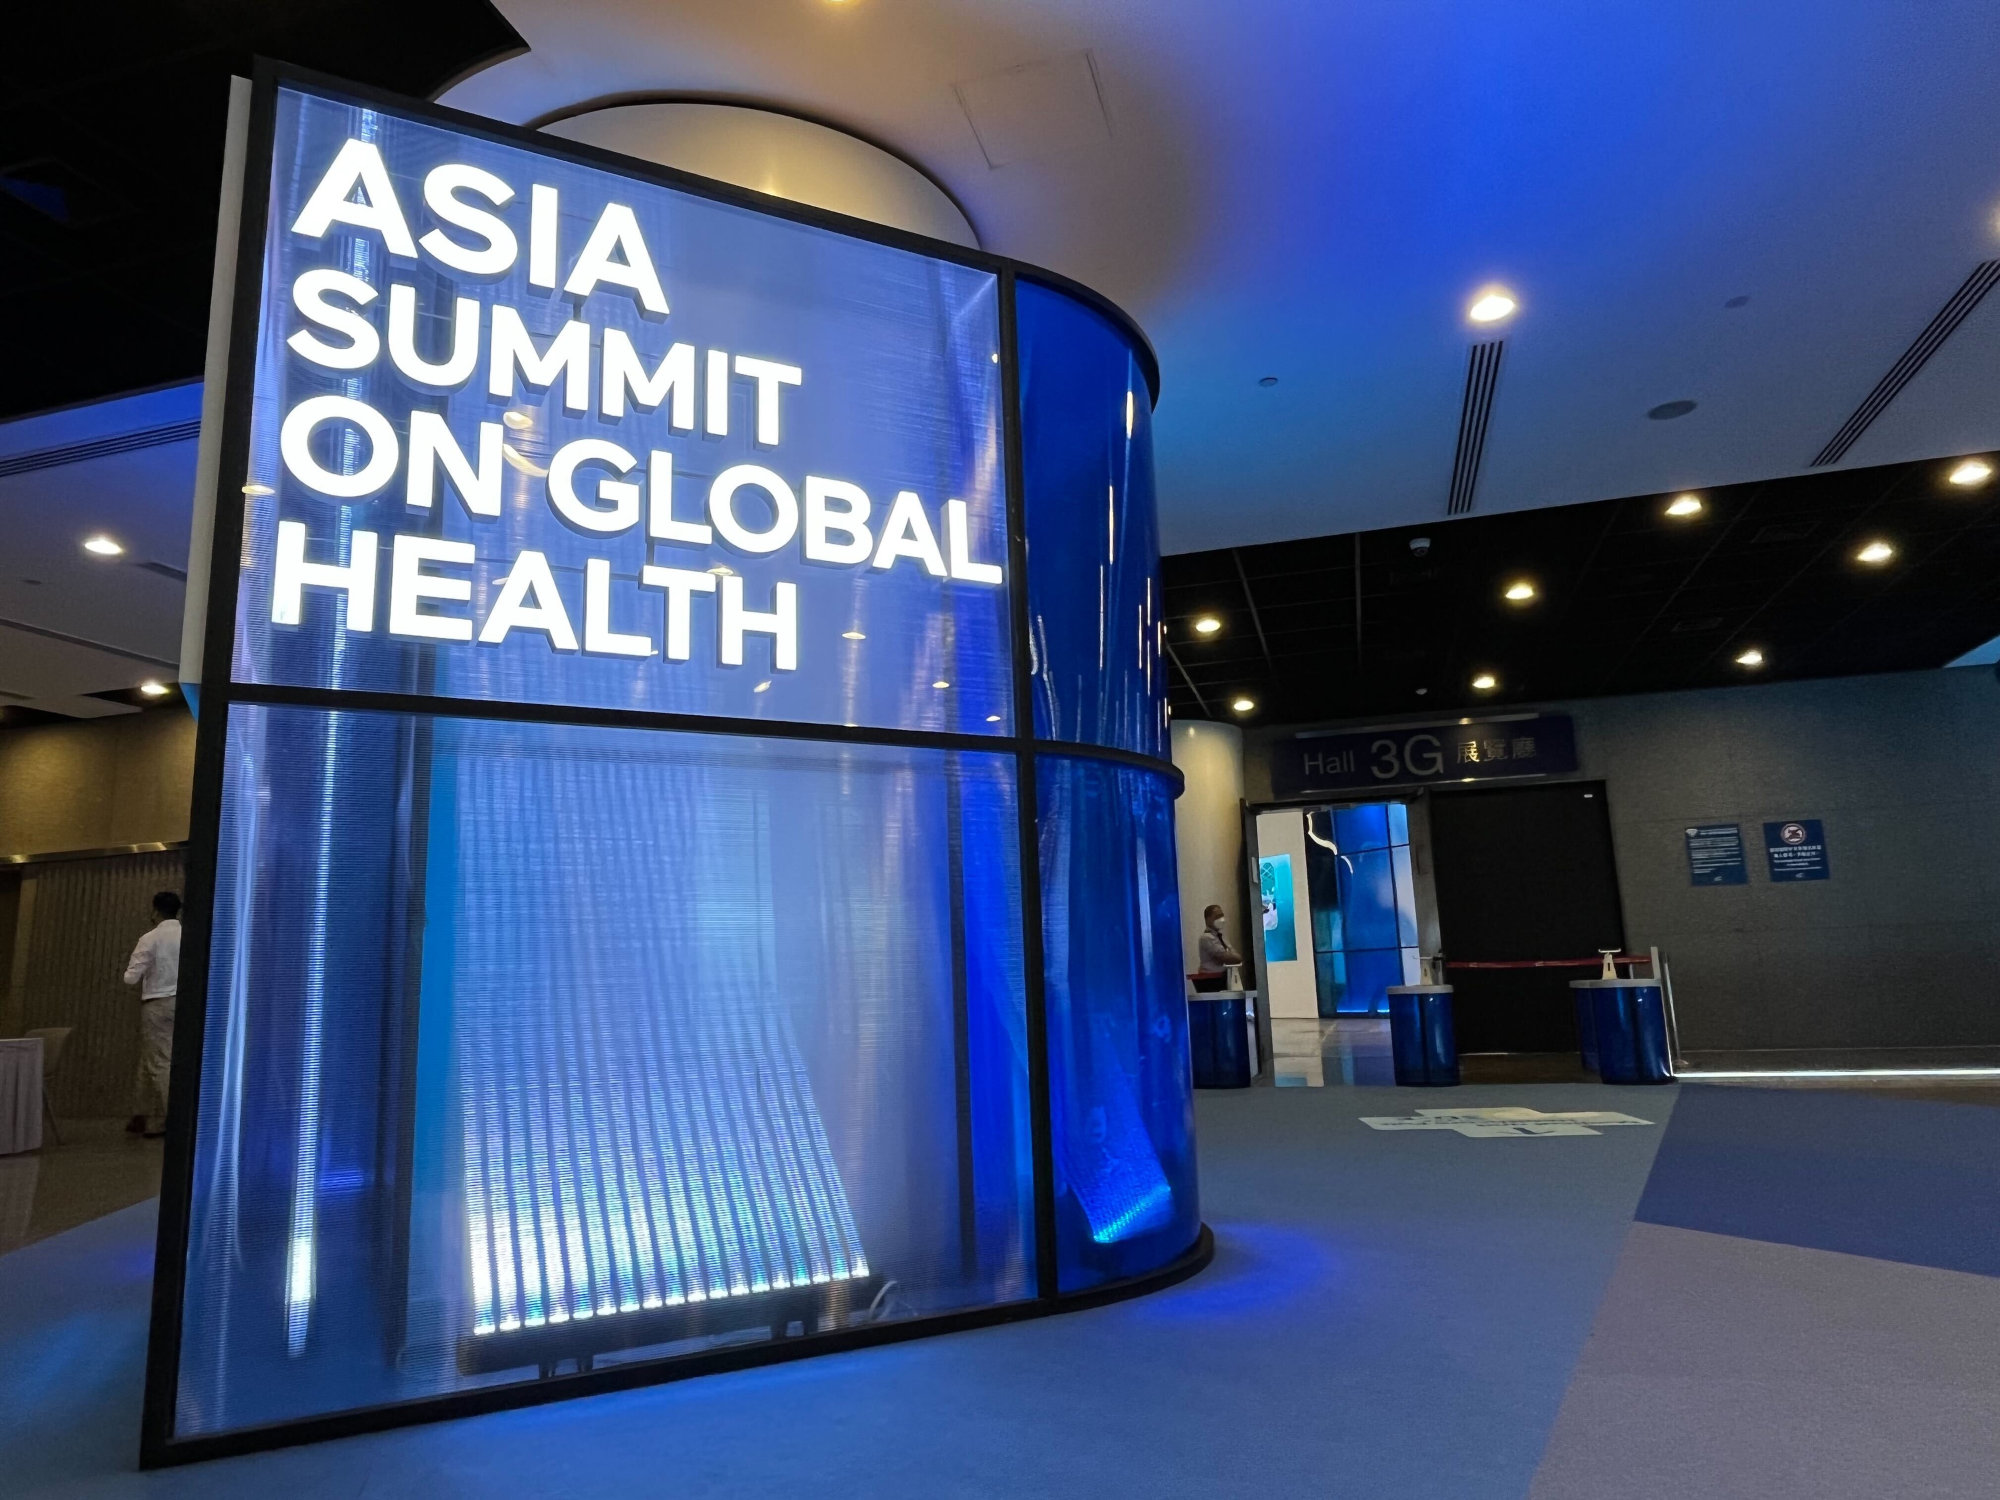 About 180 local and overseas healthcare start-ups will showcase innovations at the Asia Summit on Global Health. Photo: Sammy Heung